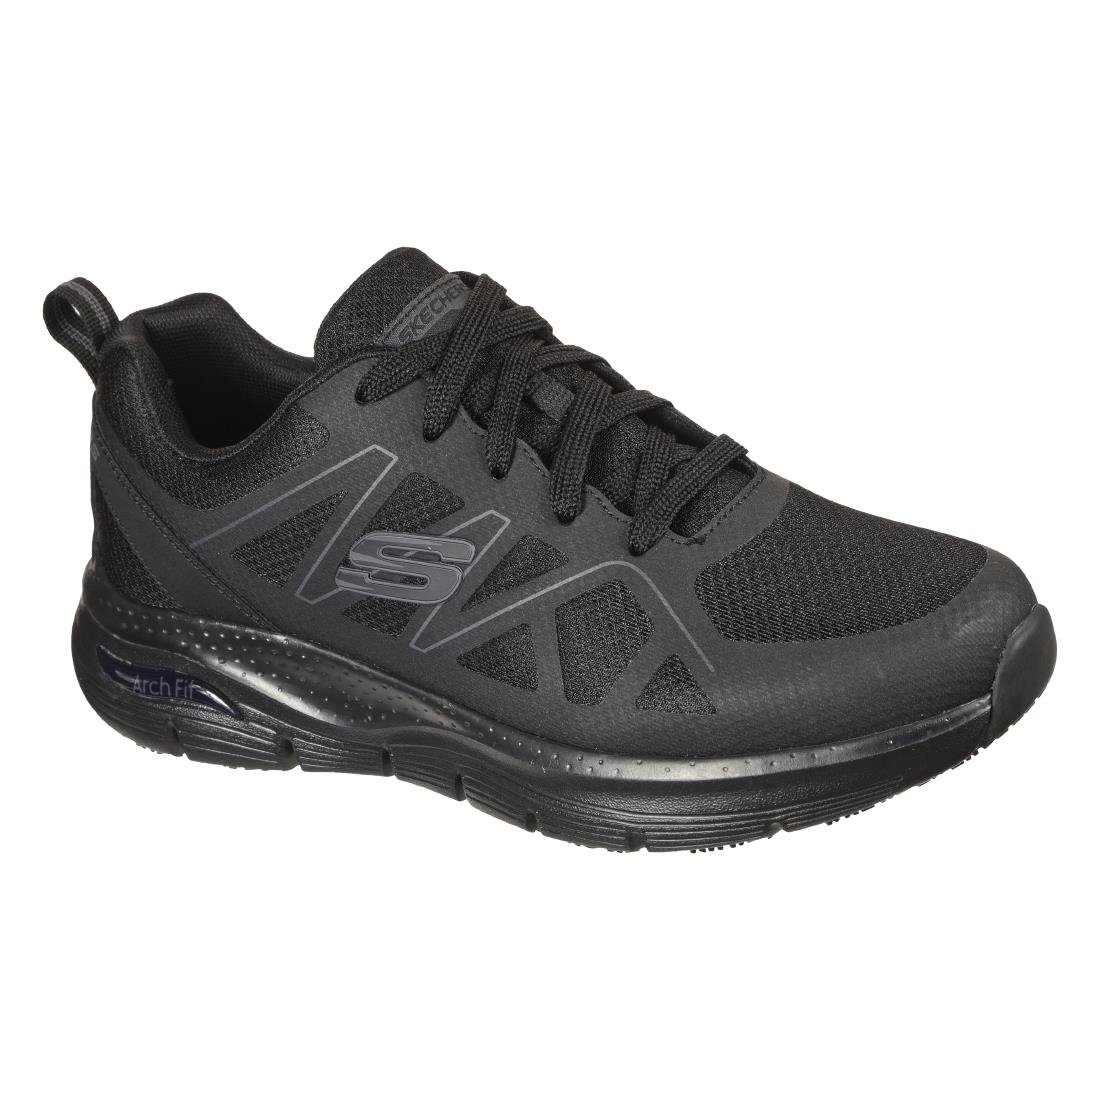 BB673-42 Skechers Axtell Slip Resistant Arch Fit Trainer Size 42 JD Catering Equipment Solutions Ltd